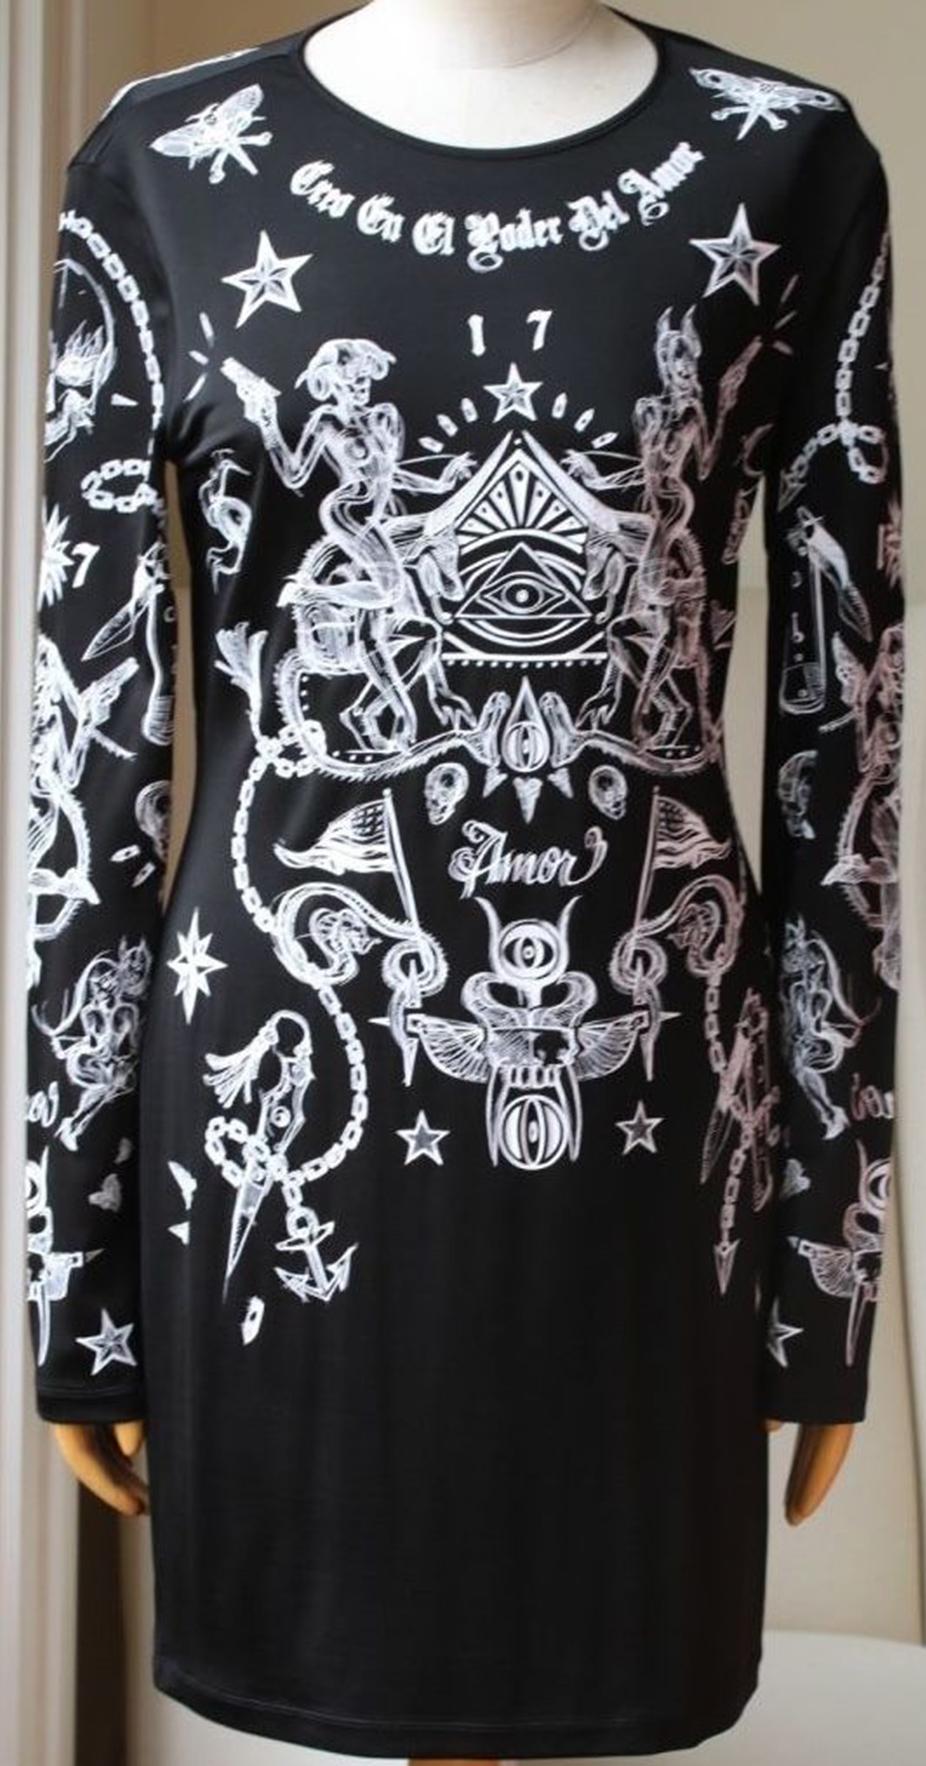 This black and white jersey Givenchy dress is patterned with Riccardo Tisci's new season tattoo print. It embodies the label's streetwear edge and features an assortment of tattoo iconography including skulls, stars and chains. Cut for a slim fit,